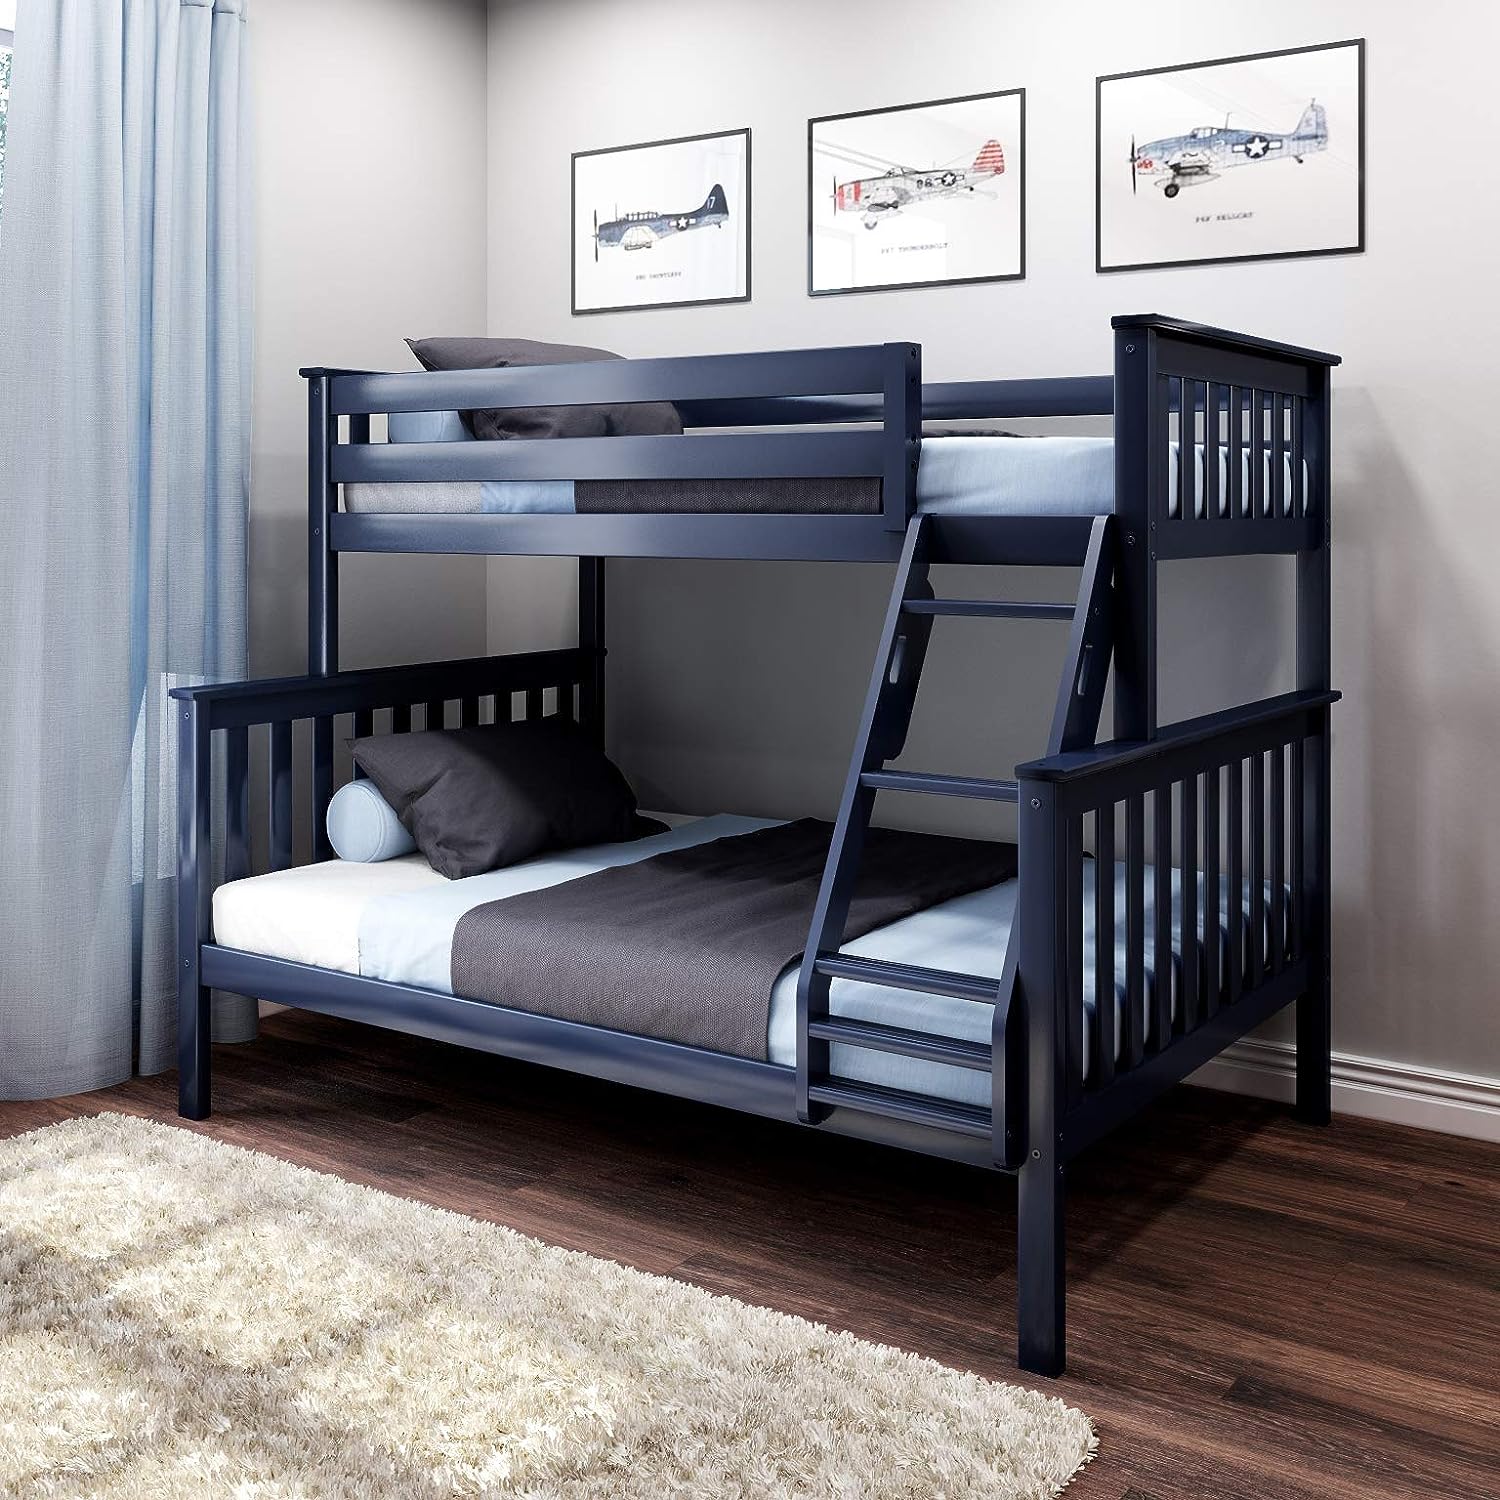 Max & Lily Bunk Twin Bed Over Full Size with Ladder